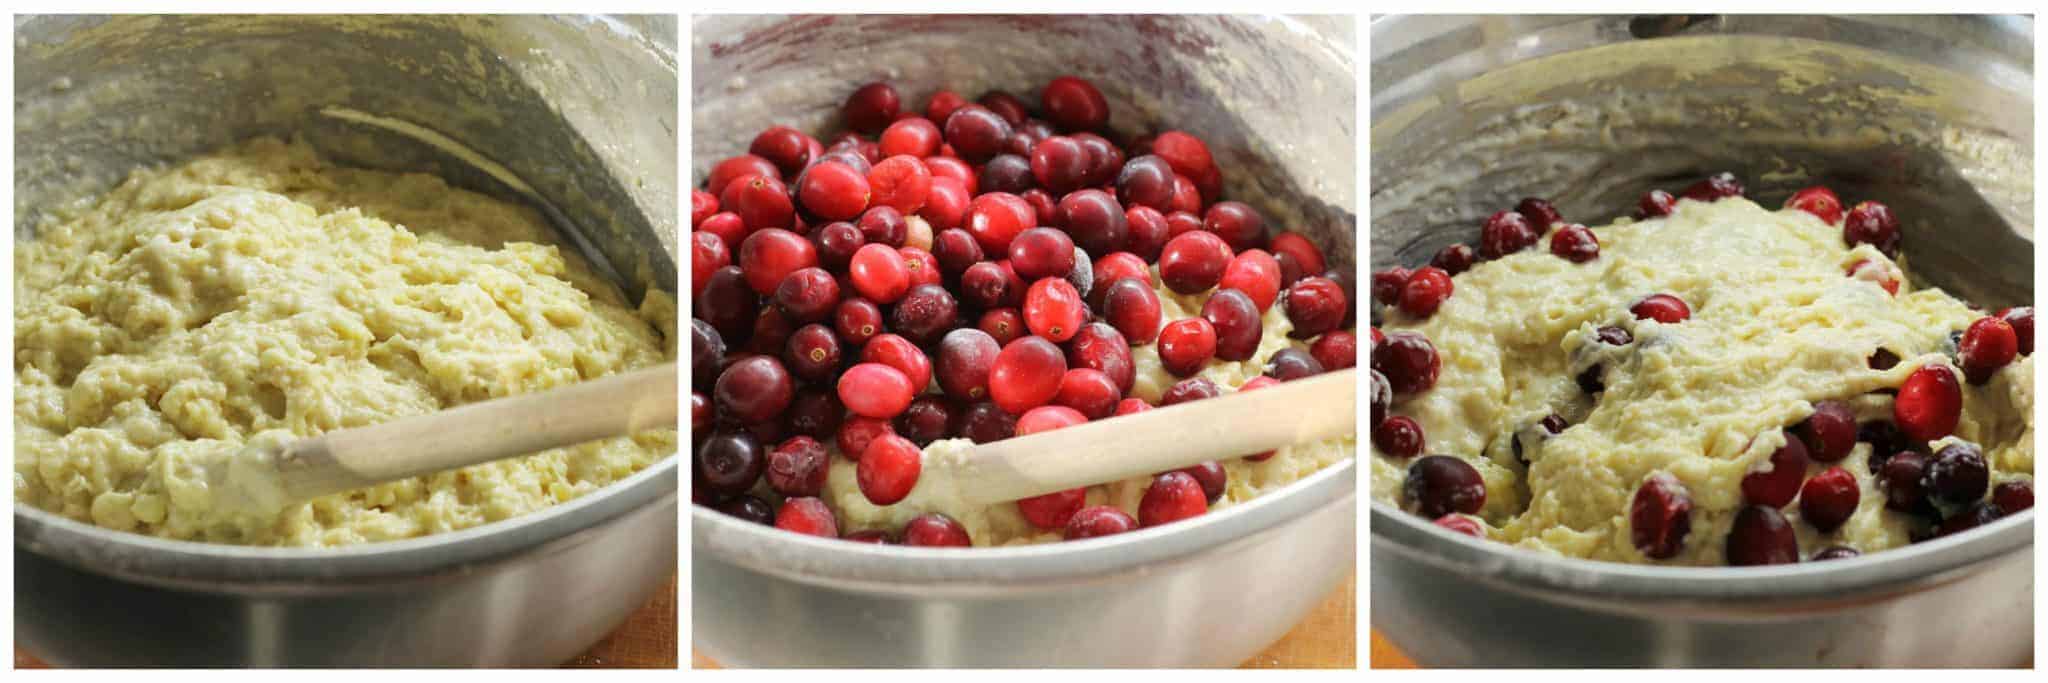 Buttermilk Cranberry Muffins - Mixing batter and adding fruit.